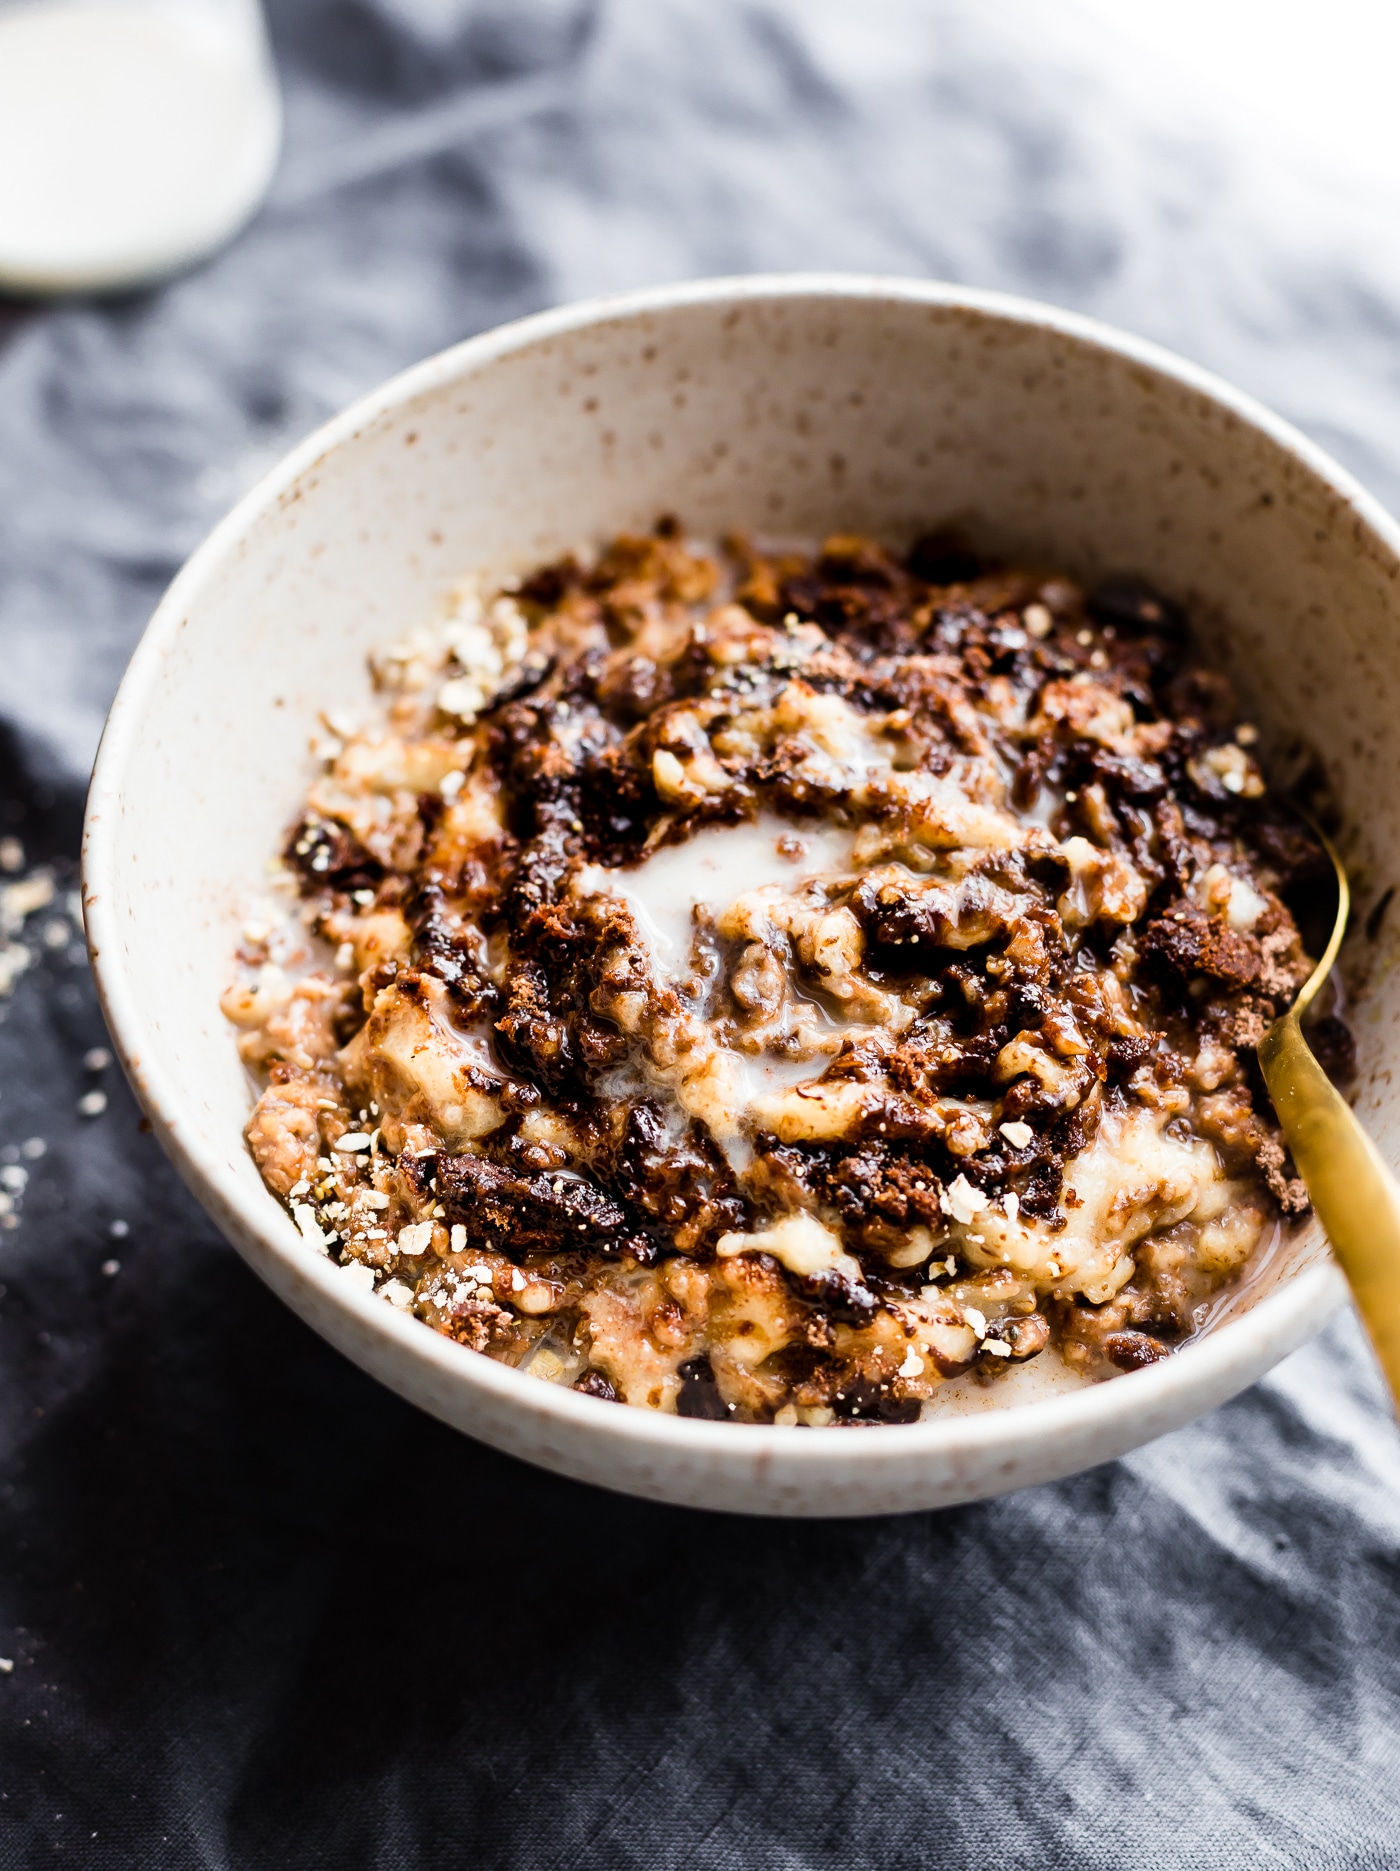 This dairy free Boston Cream Pie Banana Oatmeal is a gluten free "superfood" breakfast treat! A banana oatmeal recipe that tastes like dessert, yet satisfying and nourishing! Made with natural ingredients and packed with protein. Perfect for post workout recovery, a hearty breakfast, or just pure bliss